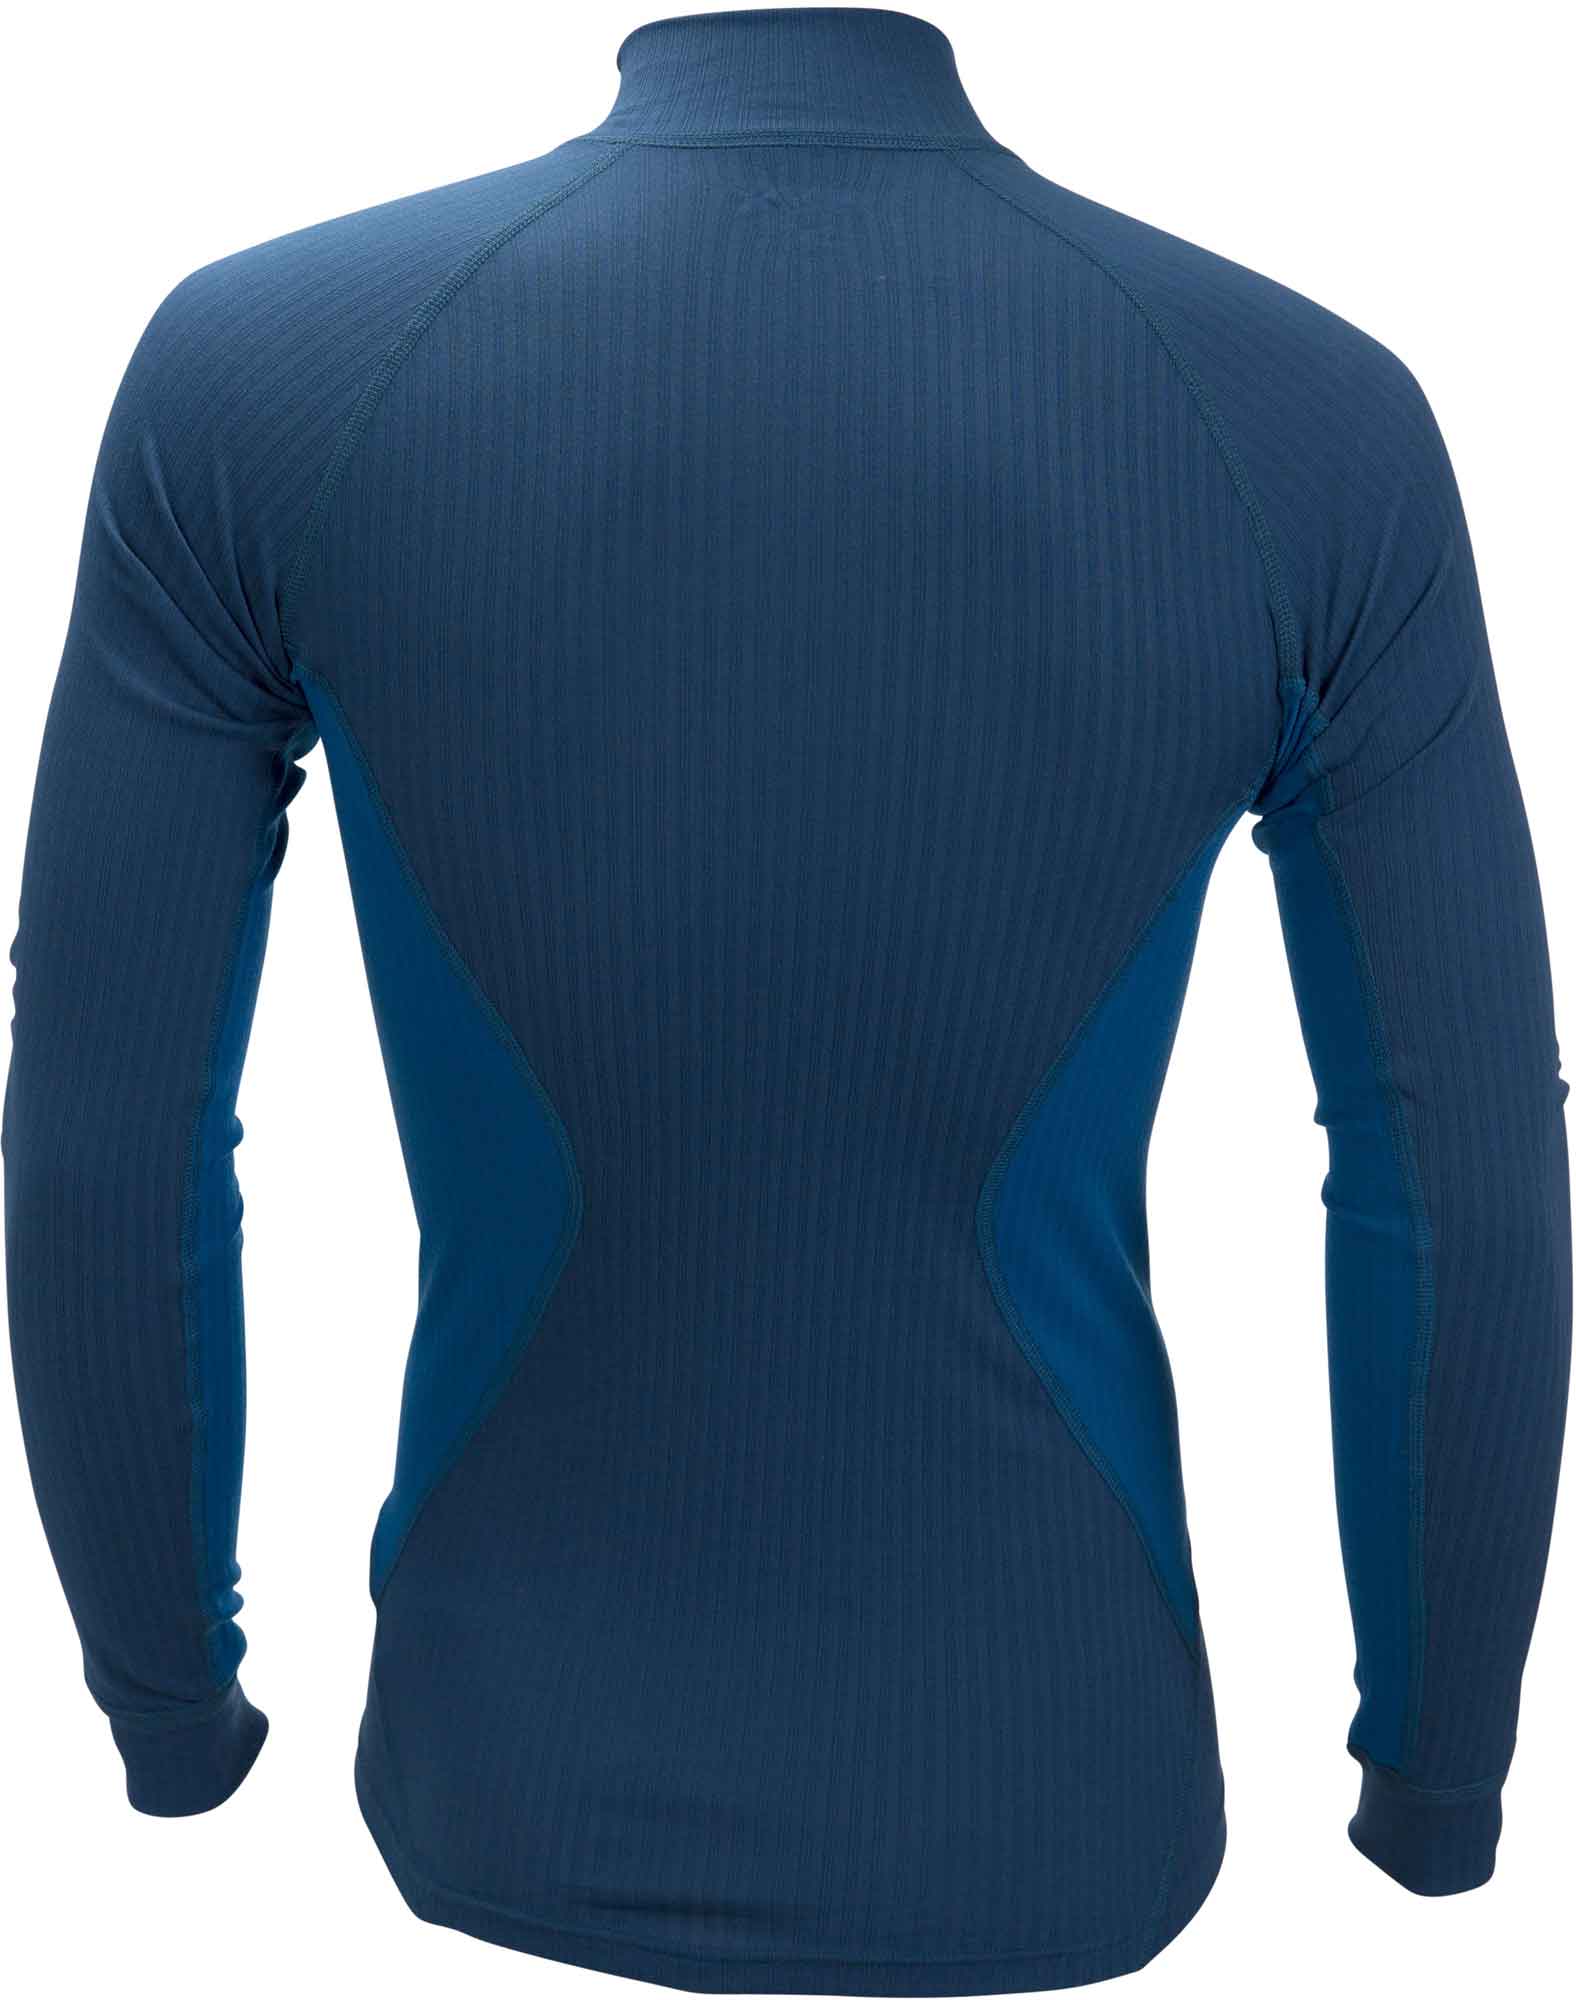 Functional long sleeve T-shirt and a collar